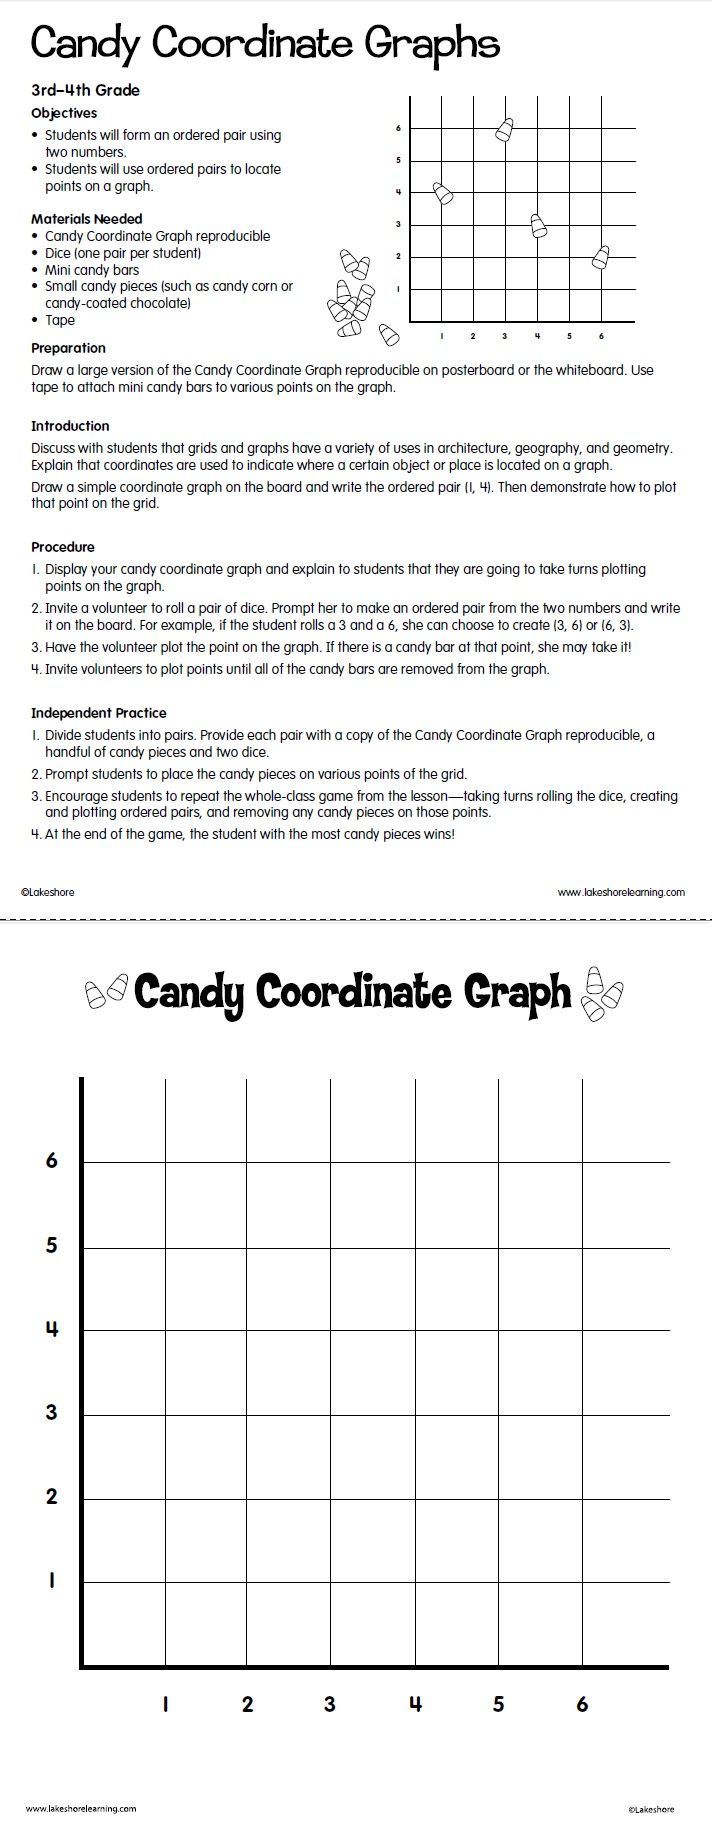 Candy Coordinate Graphs Lesson Plan From Lakeshore Learning